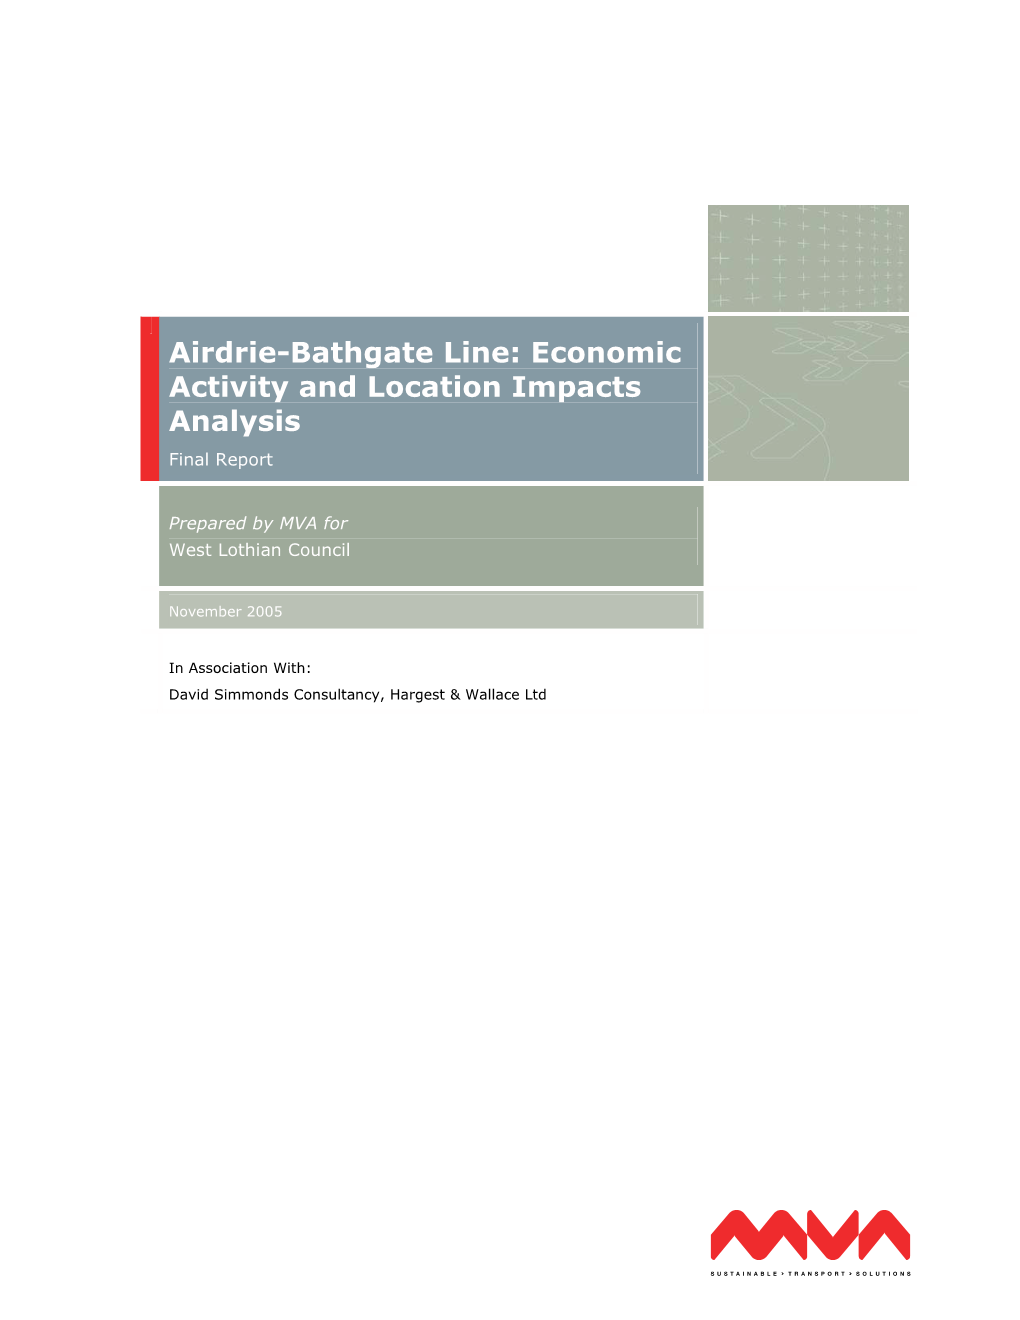 Airdrie-Bathgate Line: Economic Activity and Location Impacts Analysis Final Report